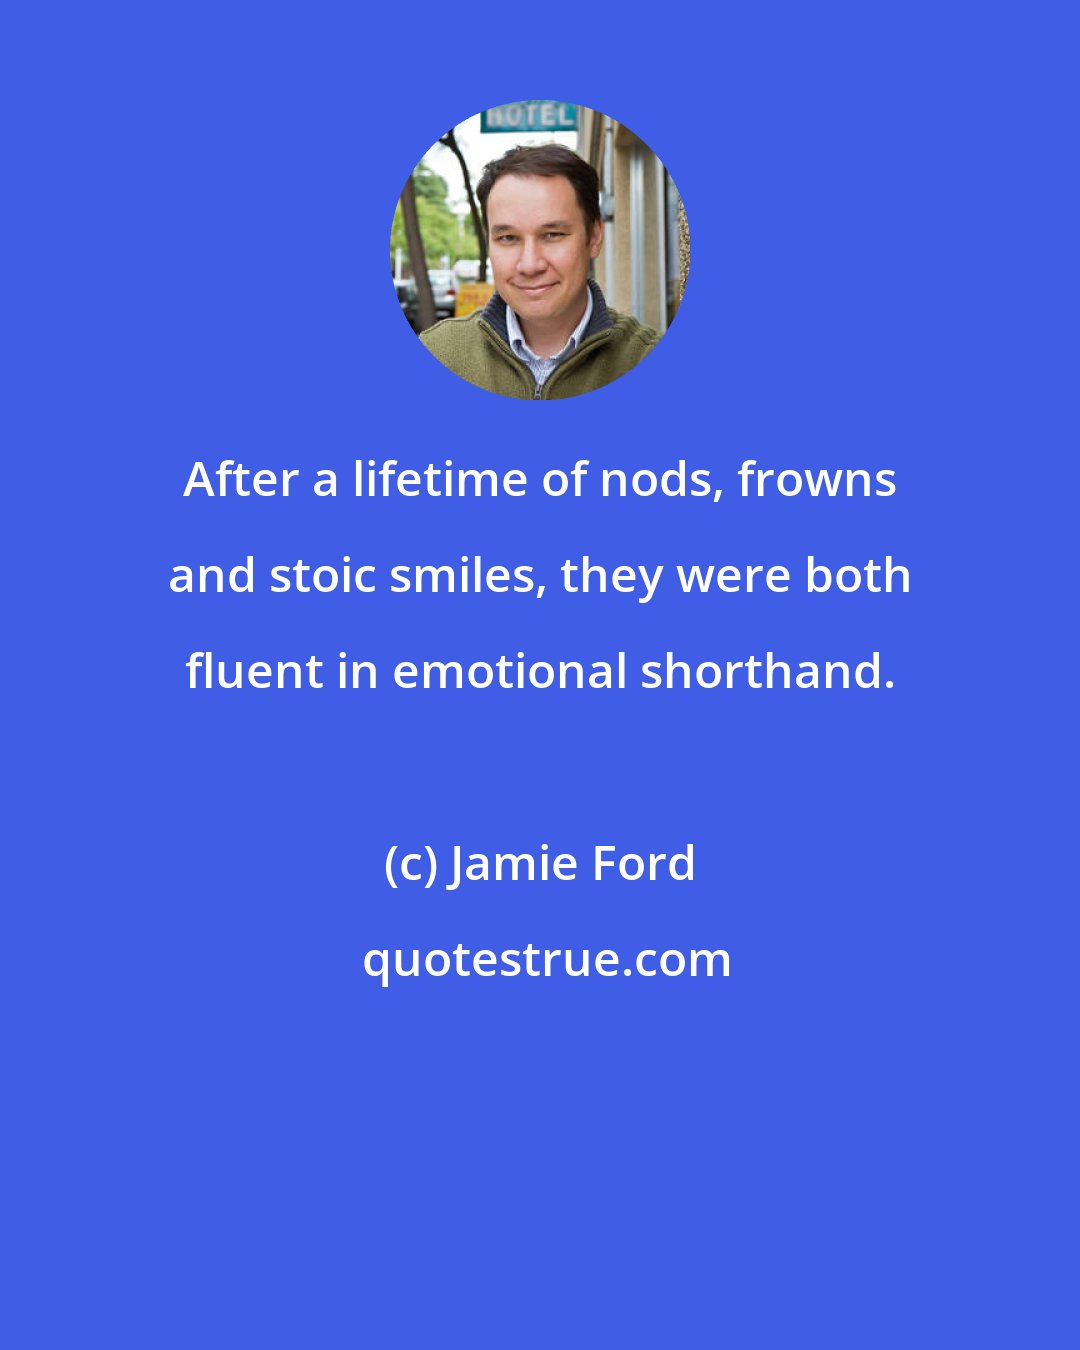 Jamie Ford: After a lifetime of nods, frowns and stoic smiles, they were both fluent in emotional shorthand.